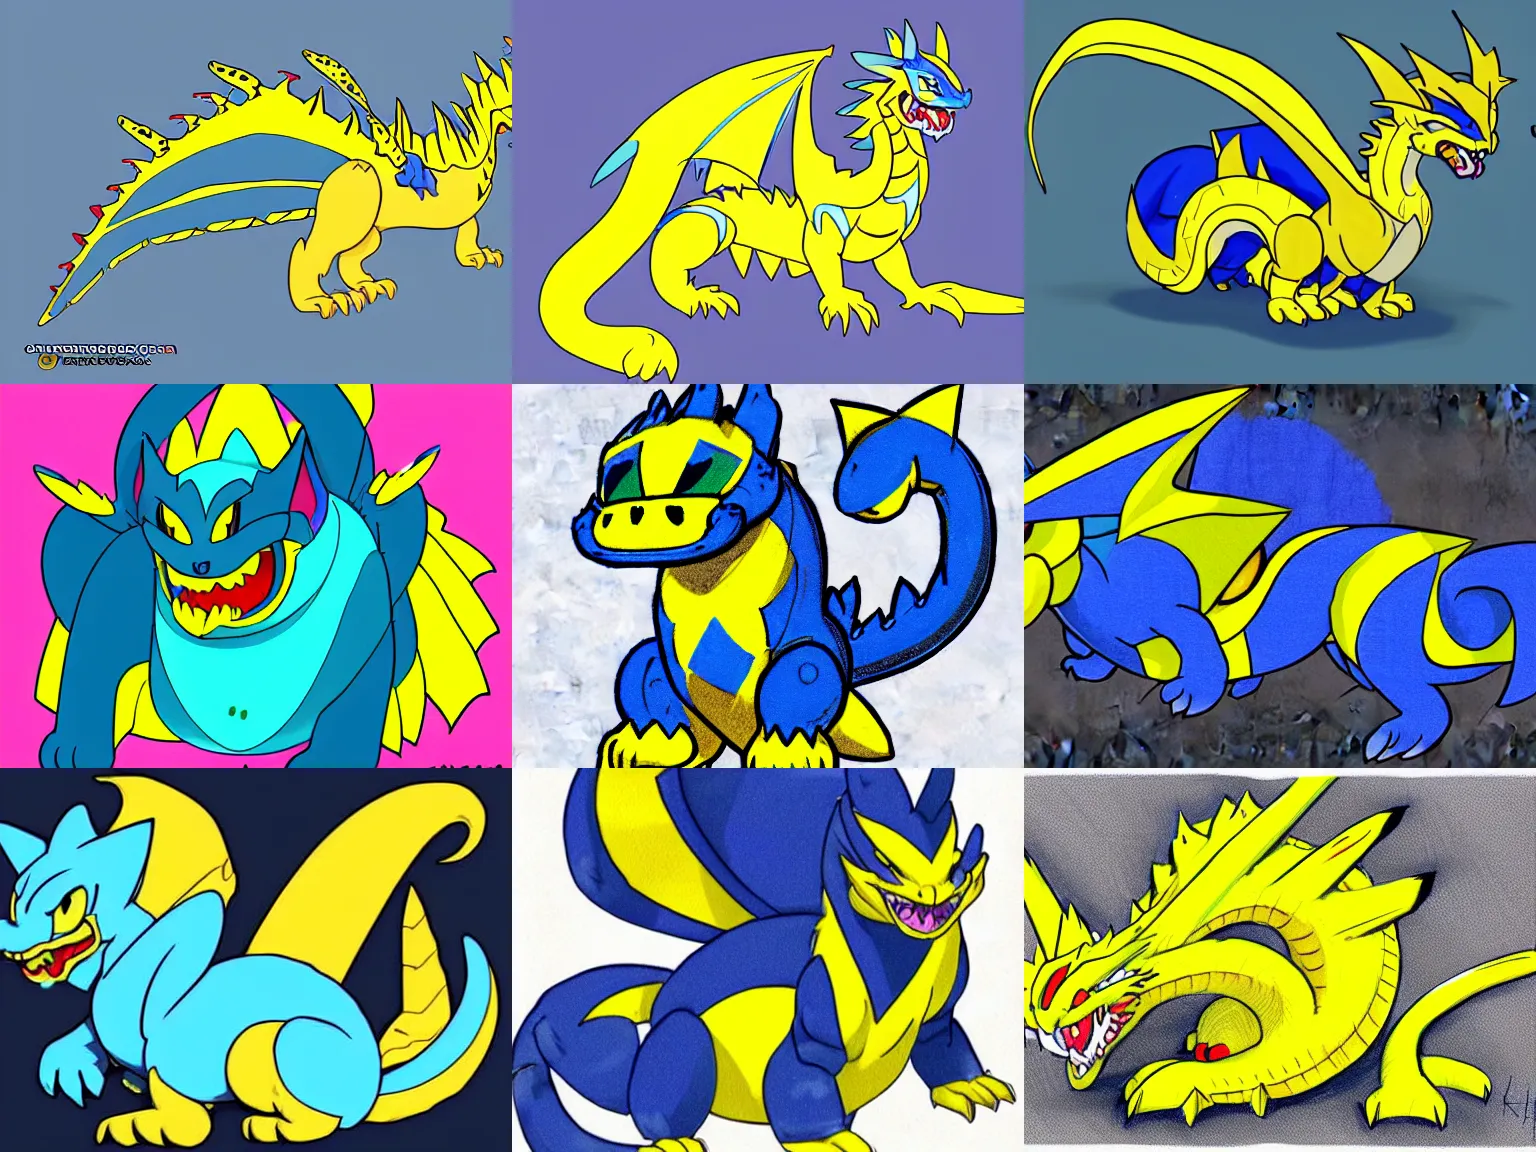 Prompt: a cartoon of a chubby blue and yellow dragon, concept art by Ken Sugimori, featured on deviantart, furry art, furaffinity, deviantart hd, cel shading, commission for